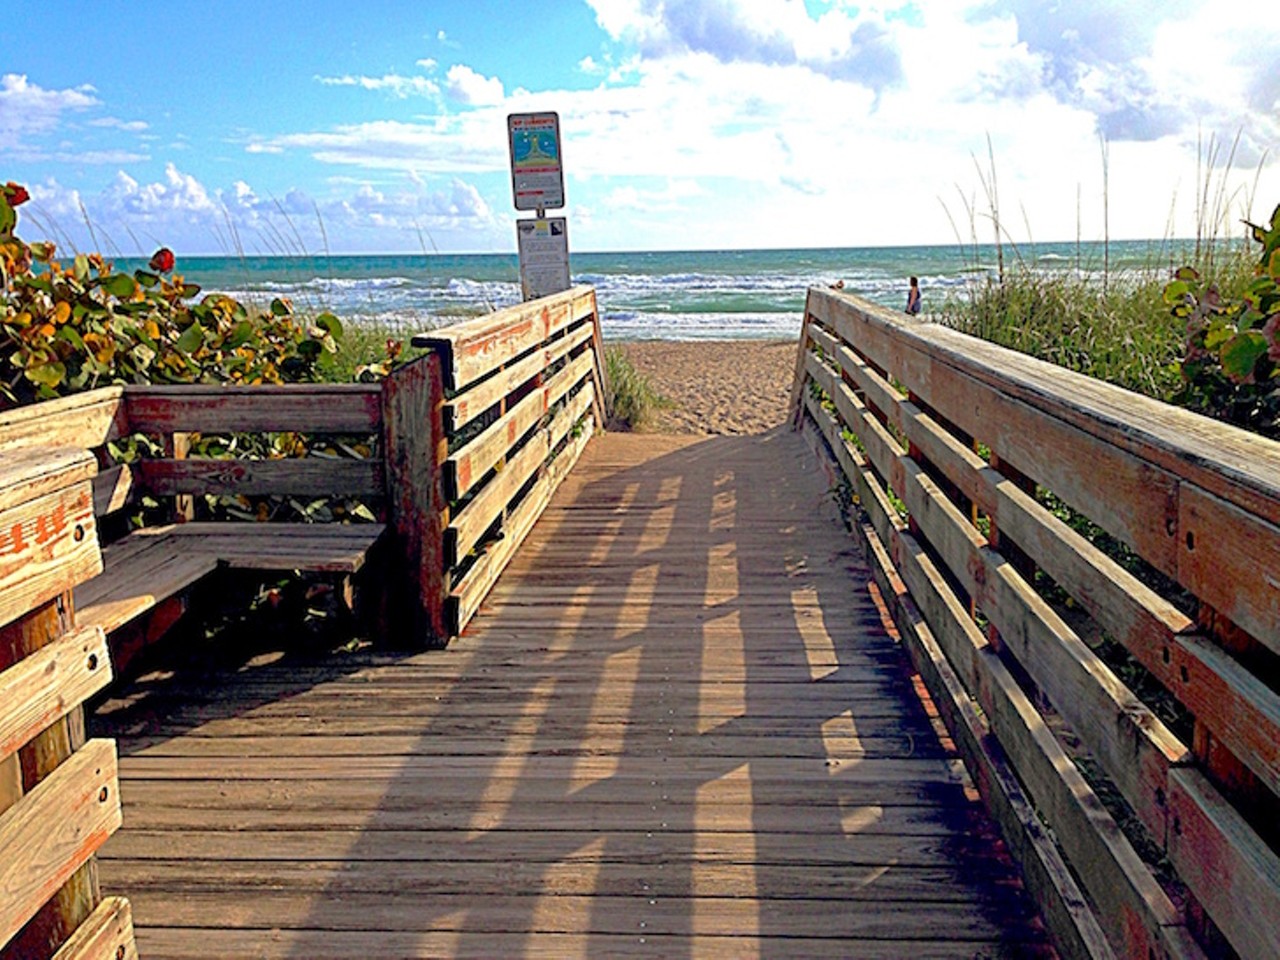 Jensen Beach
Estimated driving distance from Orlando: 2 hours and 11 minutes 
This Martin County beach is also open 24/7, and beachgoers can legally sip alcohol on the sand. Martin is the only county on the Treasure Coast where drinking and 24-hour access is permitted, despite a proposed alcohol ban in 2016. Jensen was named the &#147;Pineapple Capital of the World&#148; in 1895, and Downtown Jensen Beach is home of the annual Pineapple Festival.
Photo via Adobe